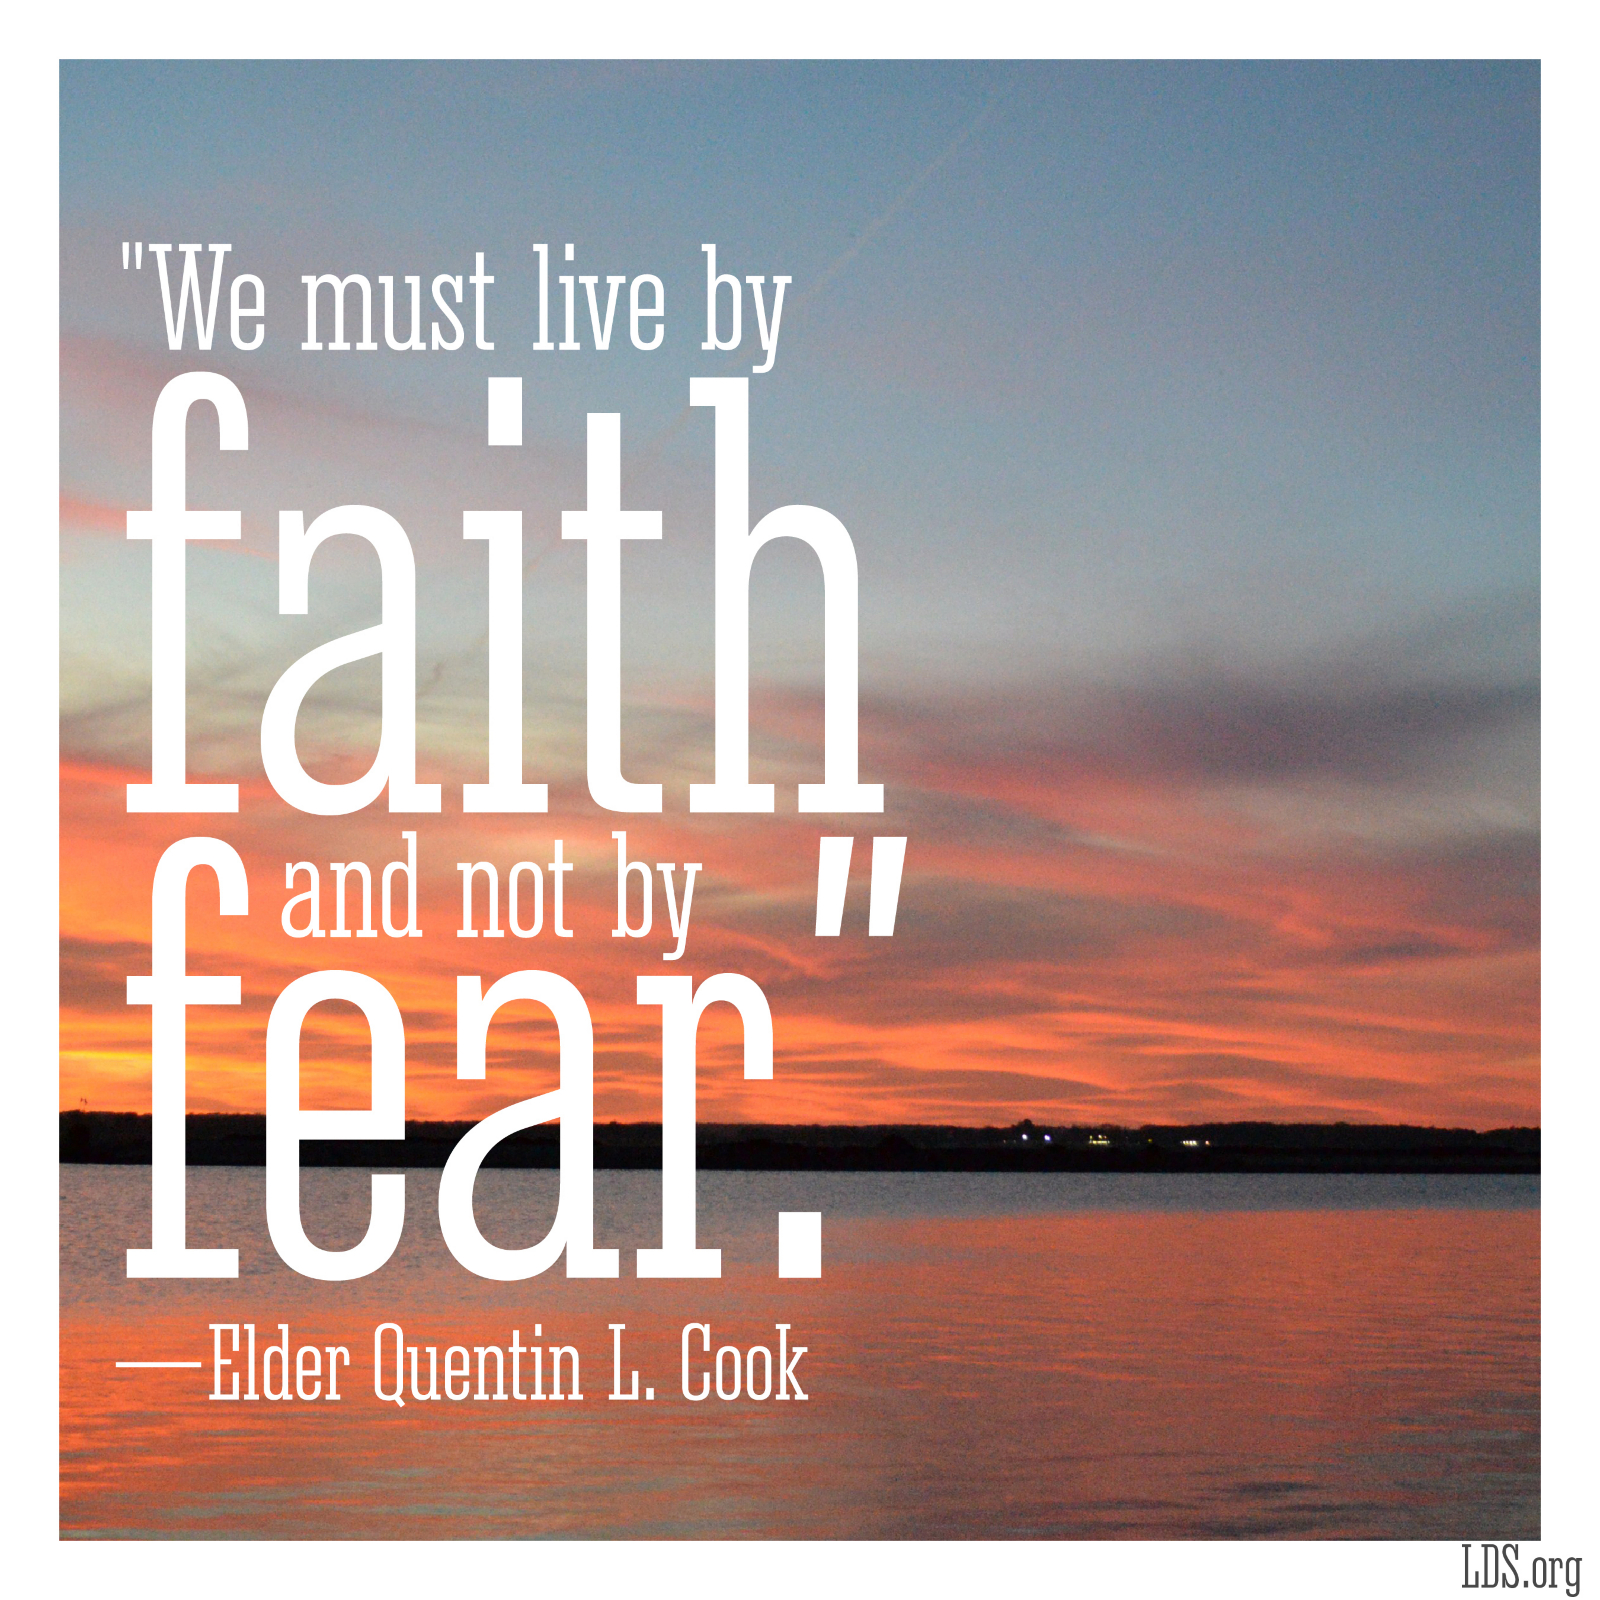 we must live by faith and not by fear. elder quentin l. cook